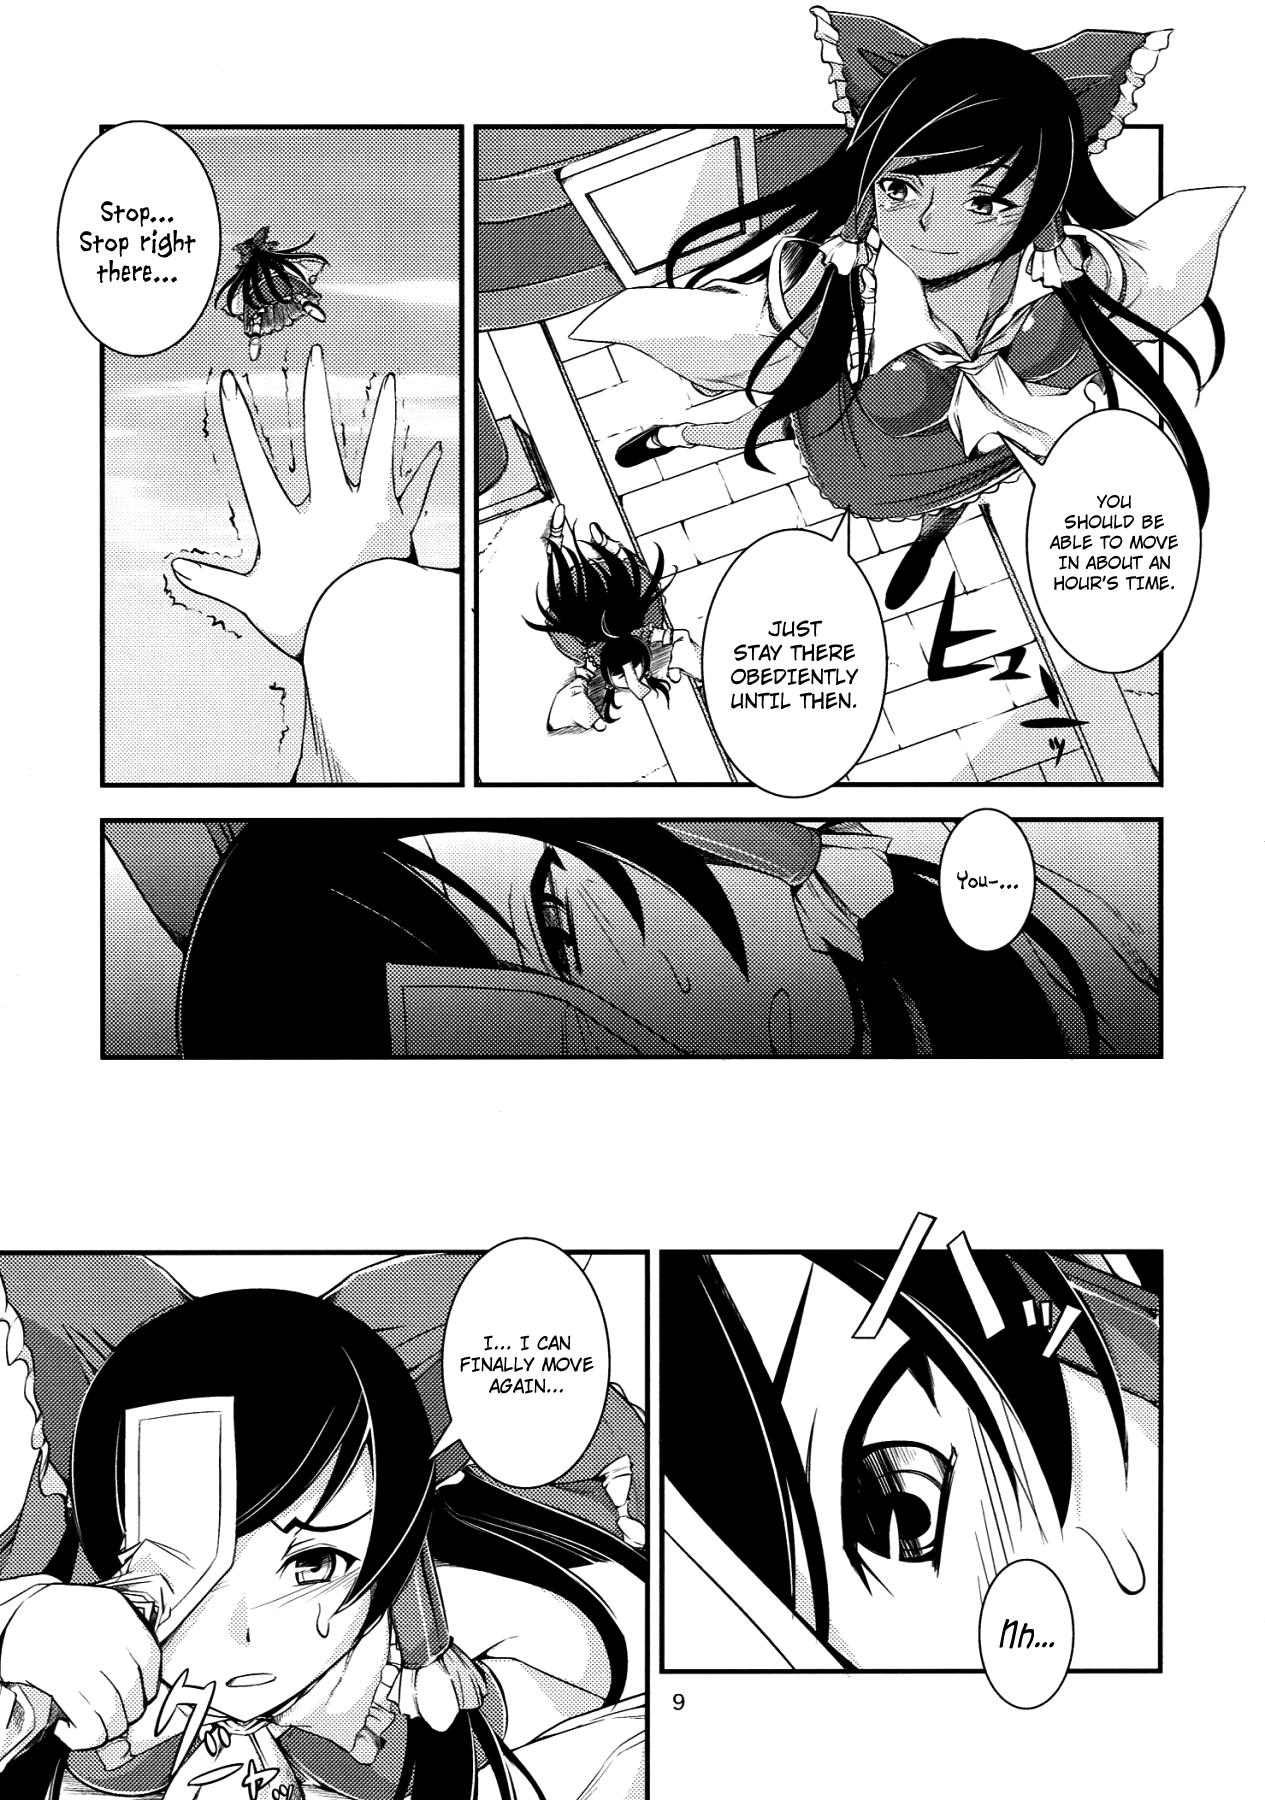 Face Fuck The Incident of the Black Shrine Maiden - Touhou project Gay Reality - Page 8